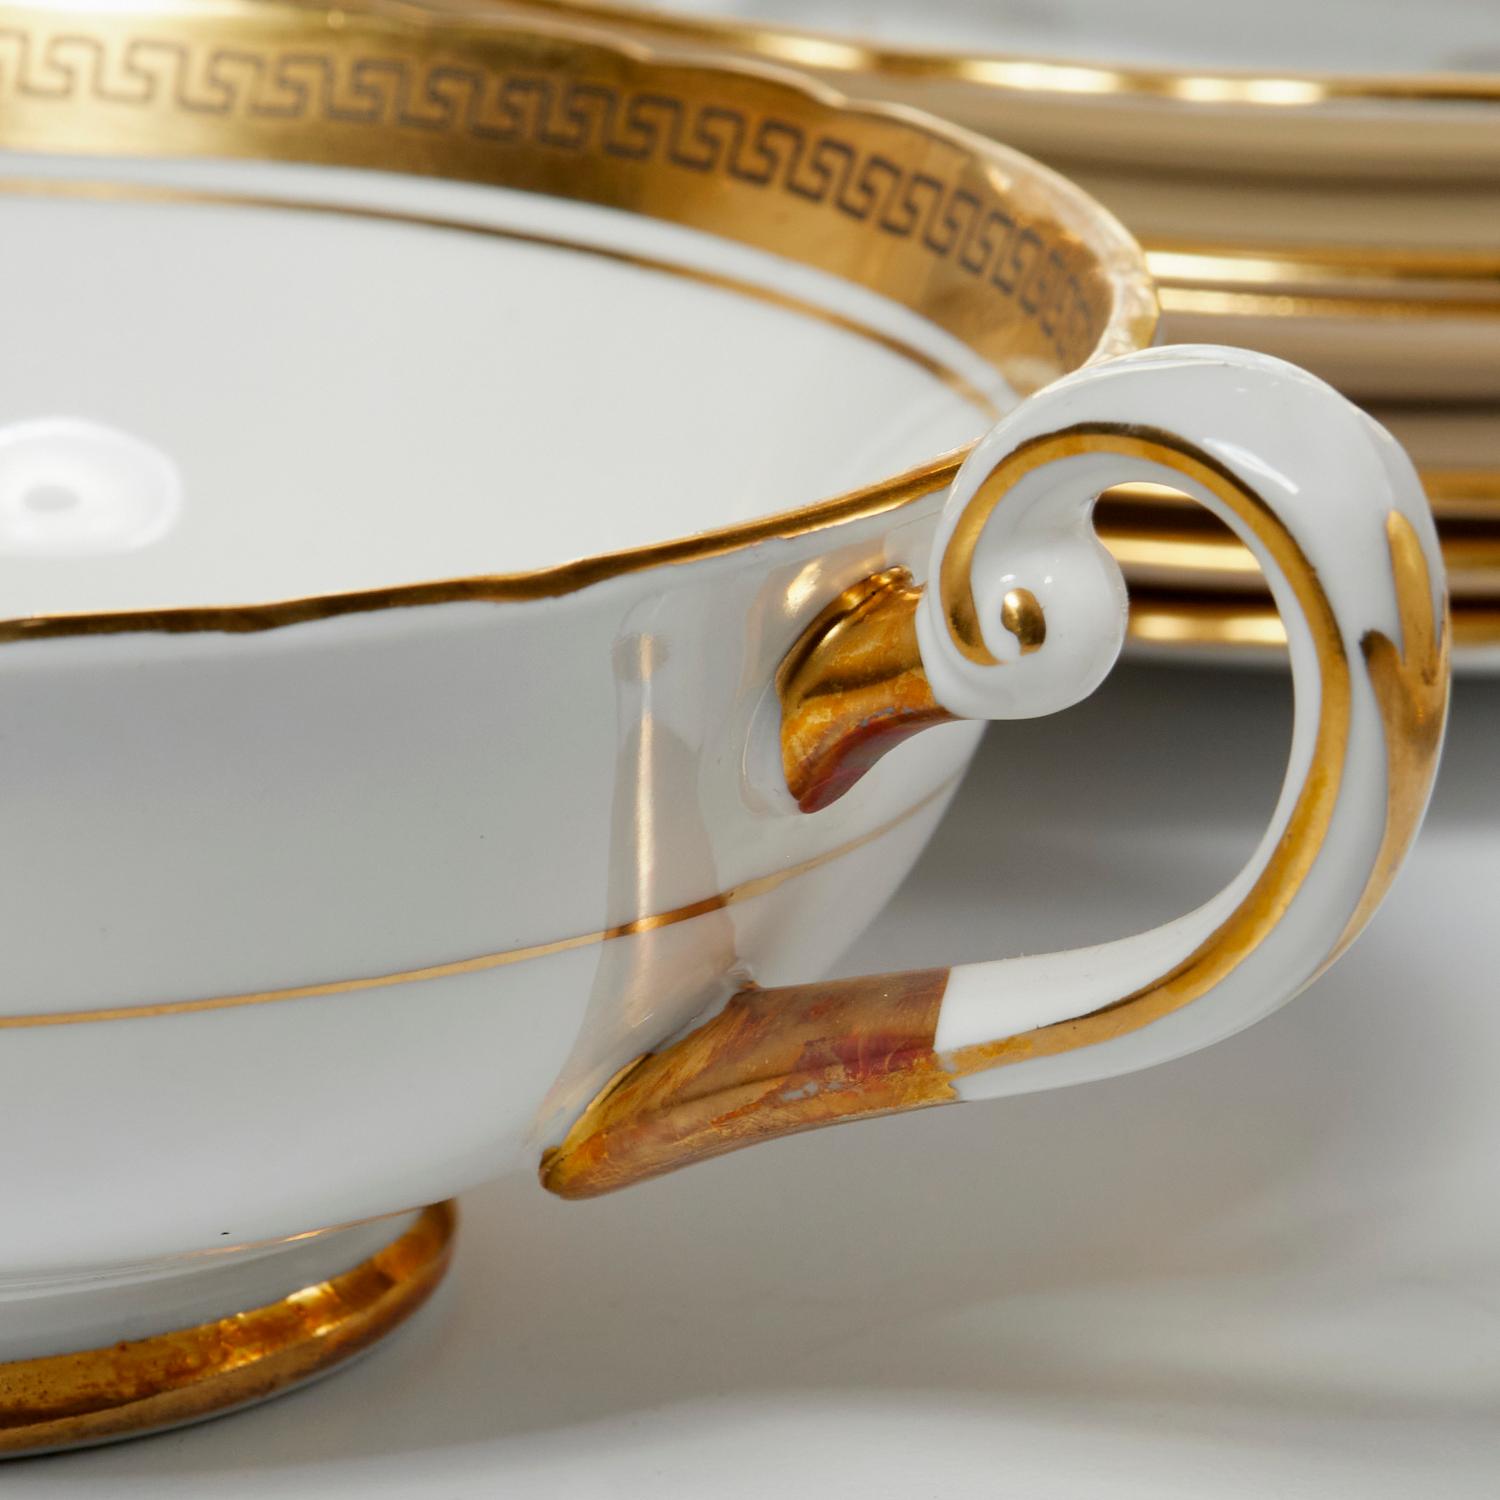 Gold Mid 20th C. English Porcelain Dinner Service (52 Pieces) for Harrods of London For Sale